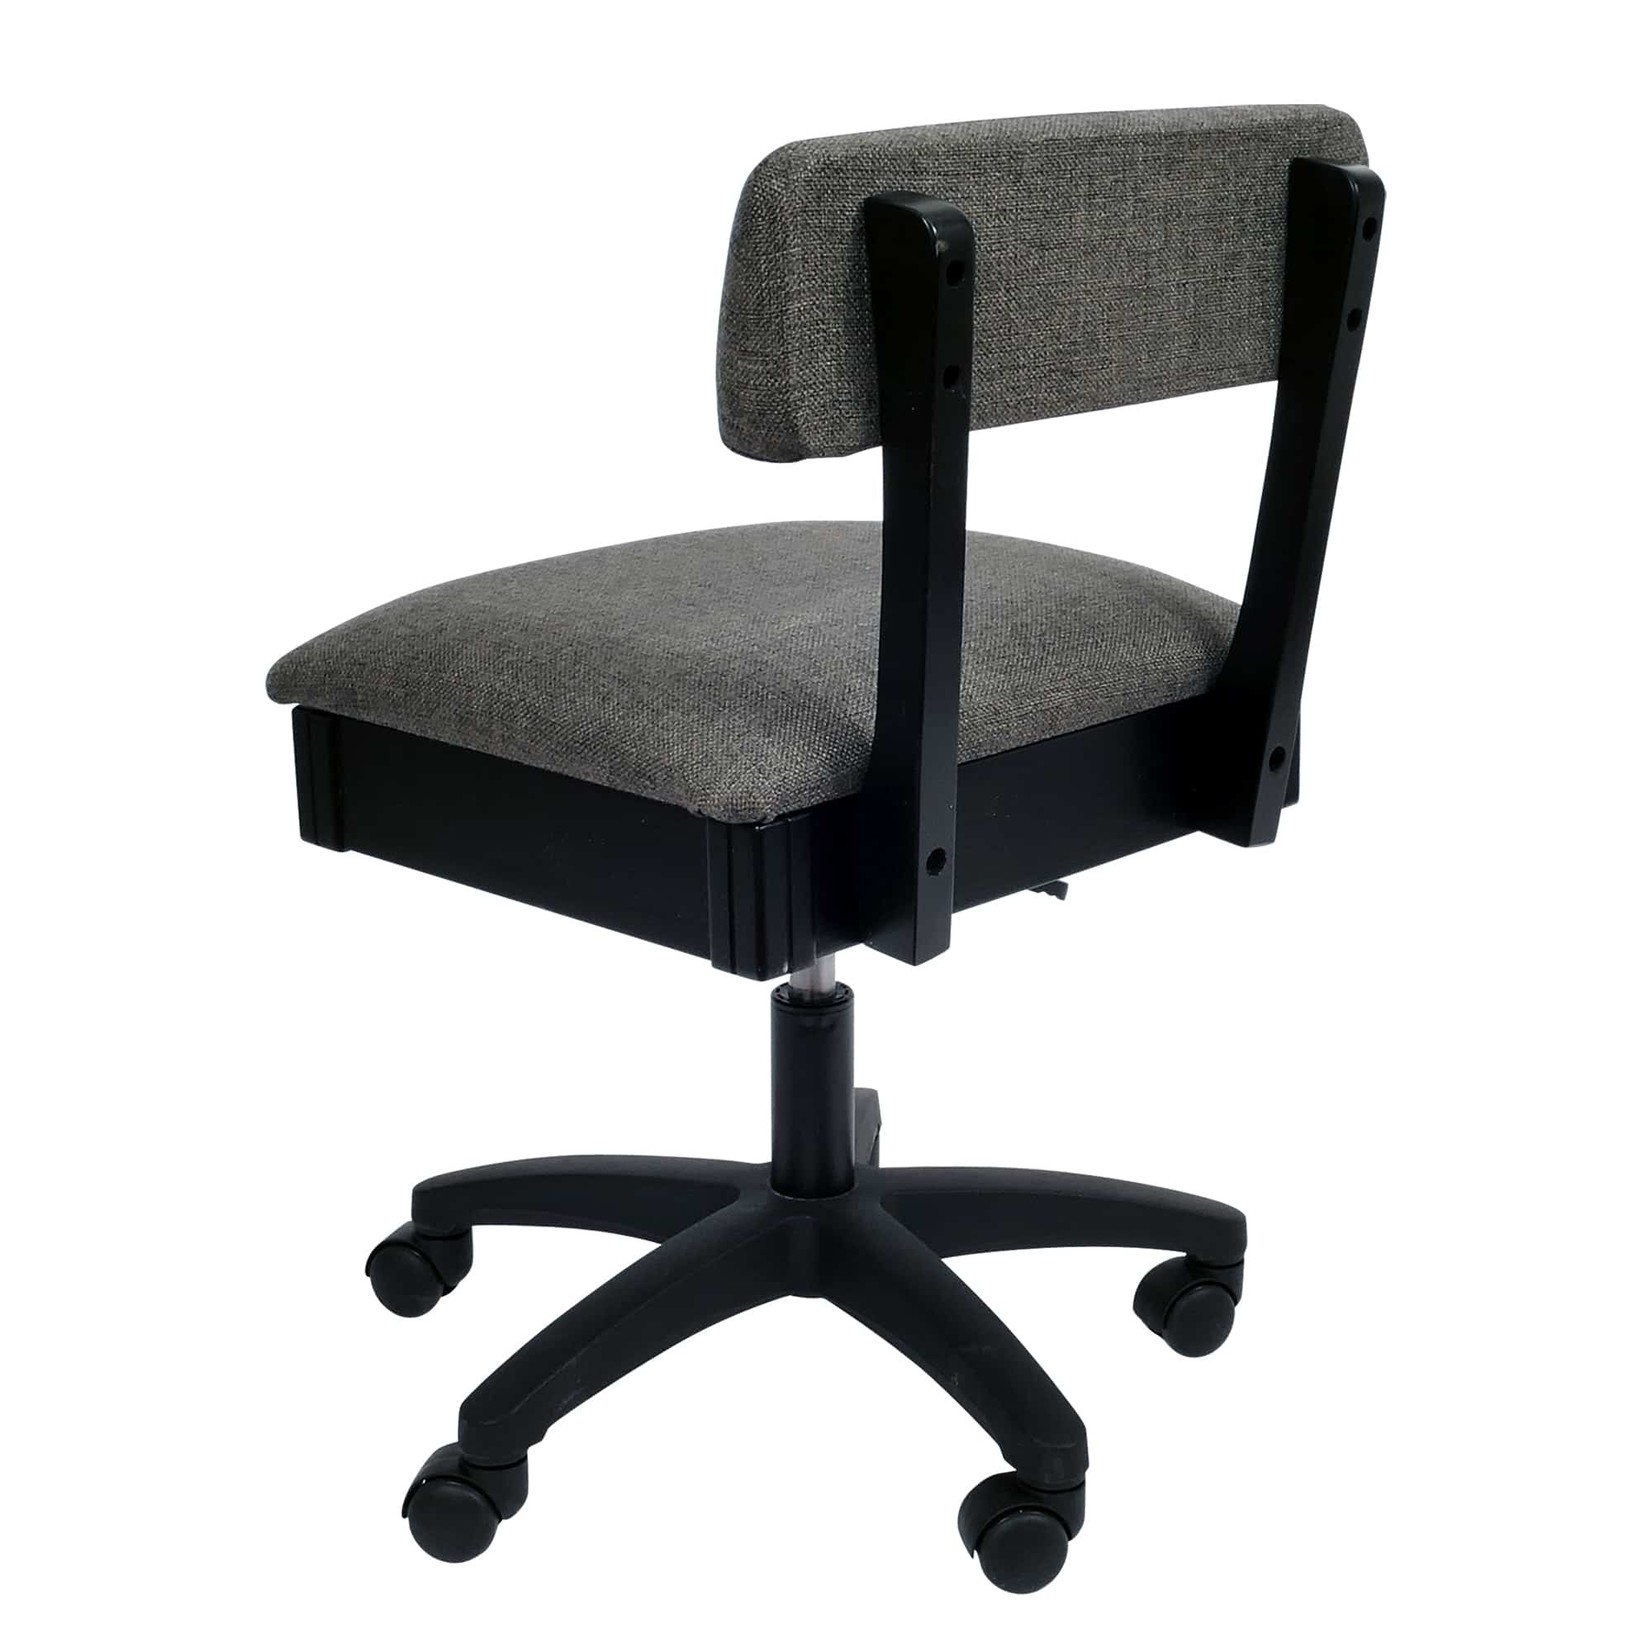 Janome Arrow Hydraulic Sewing Chair- Charcoal Grey H8123